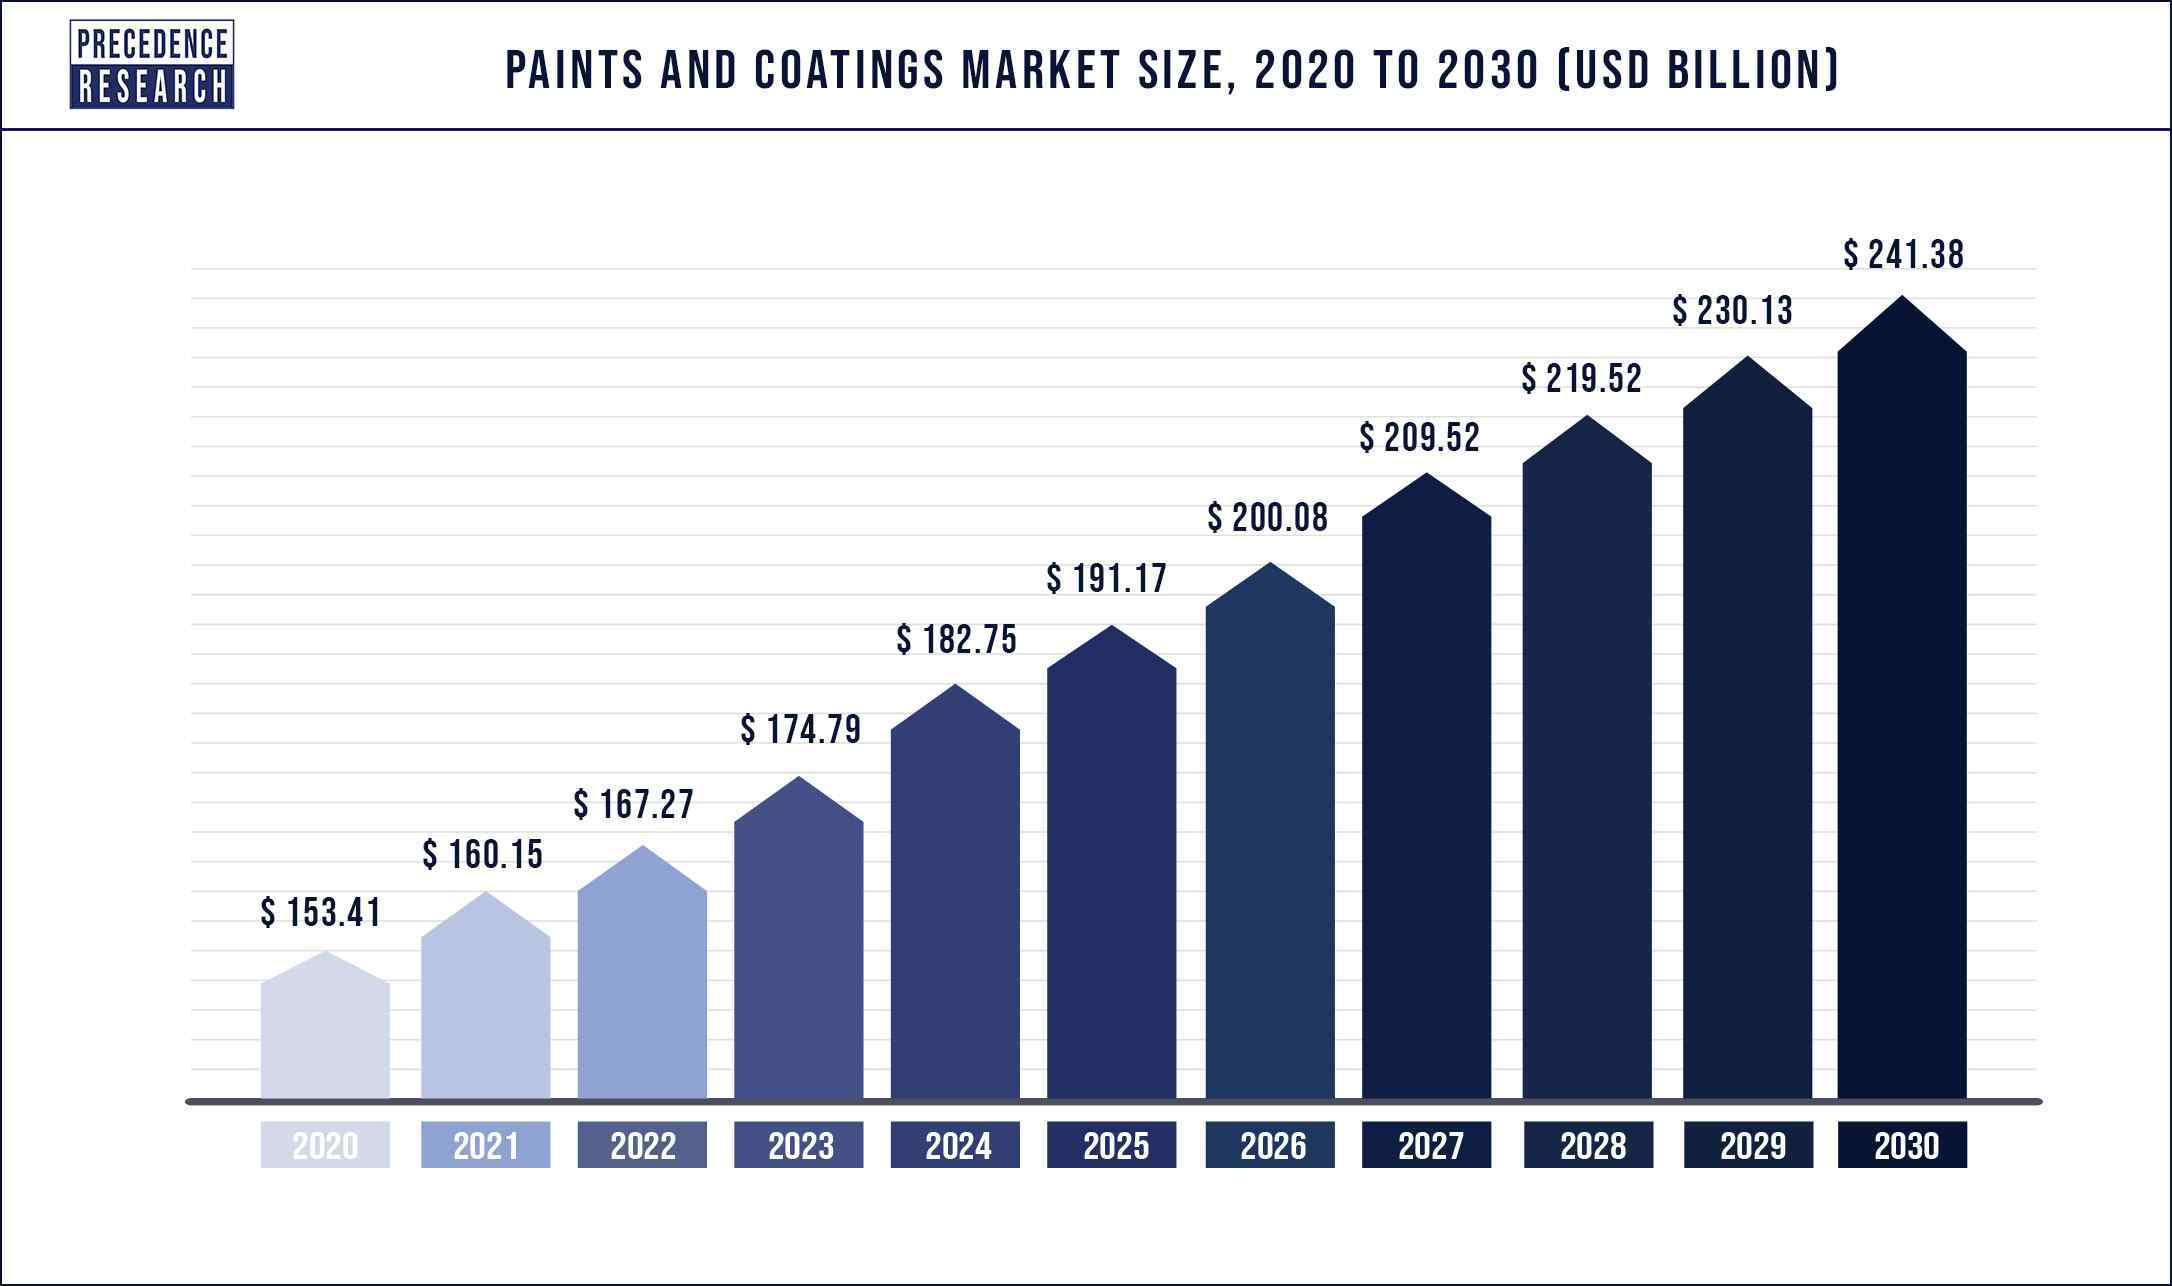 Paints and Coating Market Size 2020 to 2030